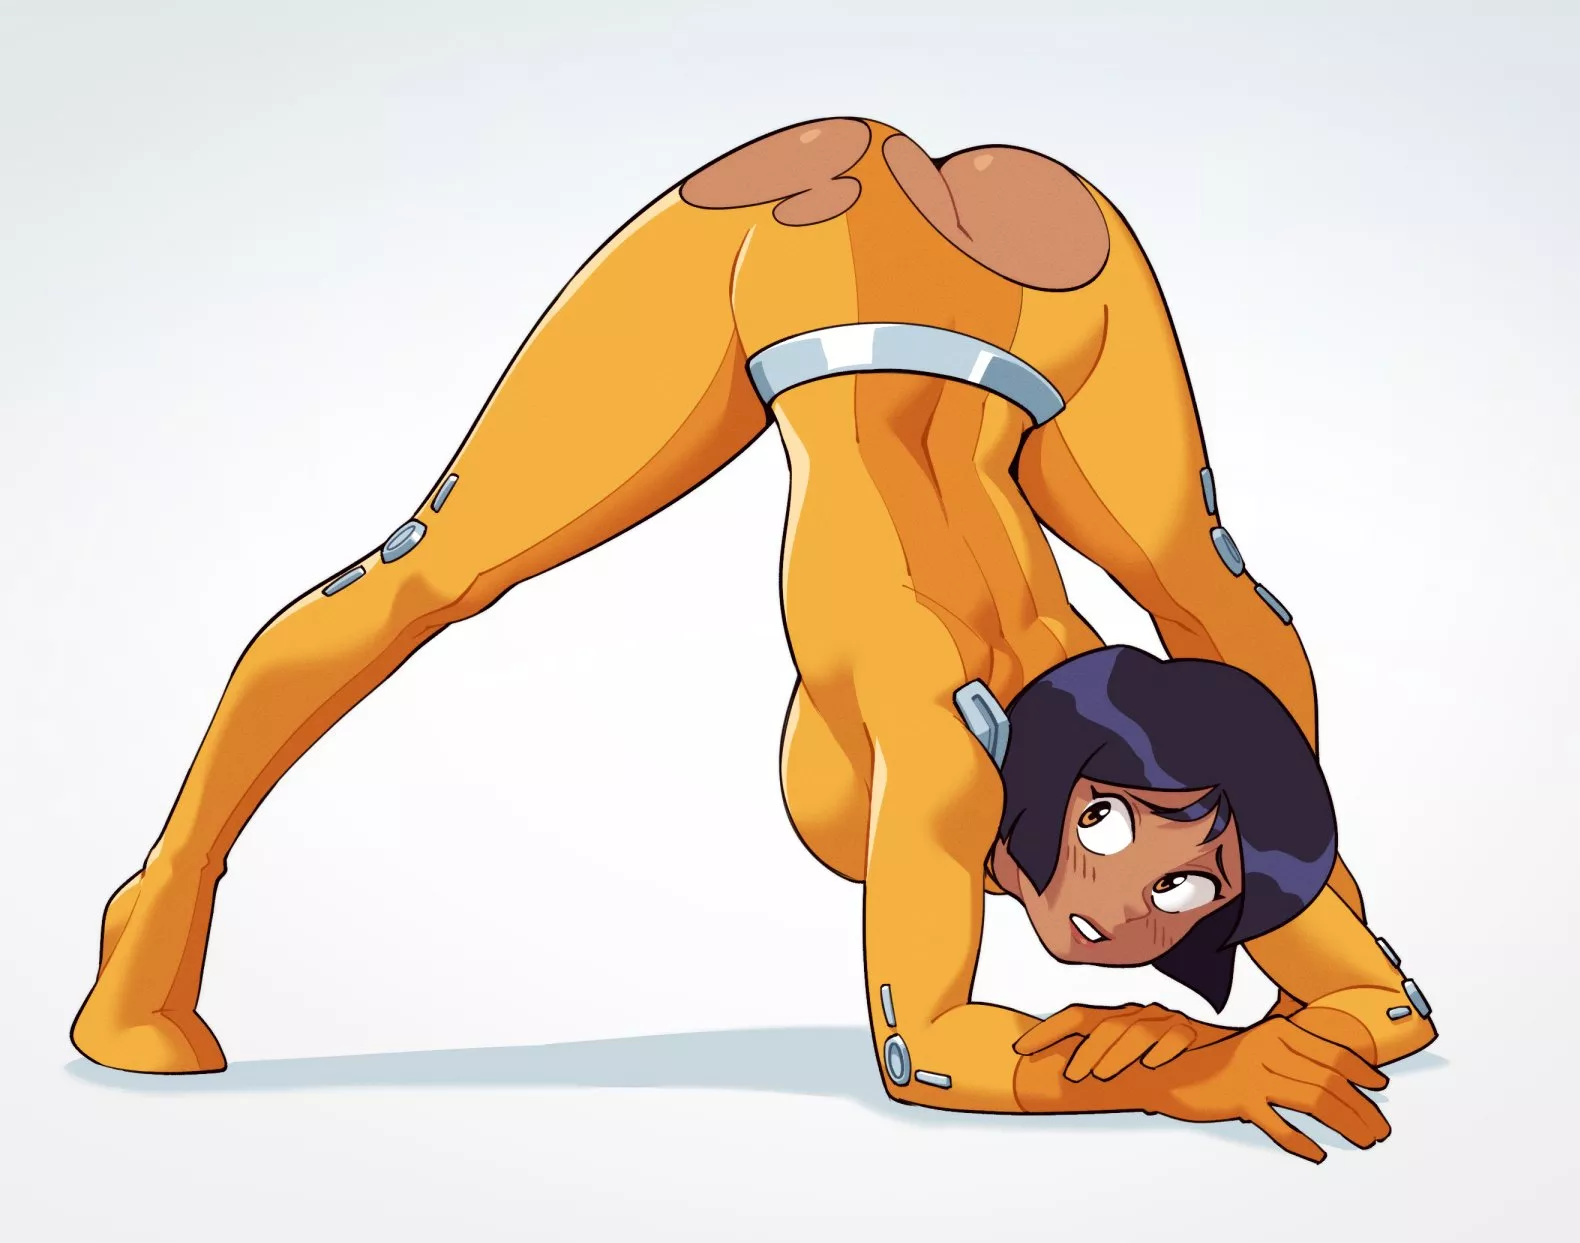 Totally Spies Porn - Alex's Torn Suit (Suoiresnu) [Totally Spies] nudes by sequence_string